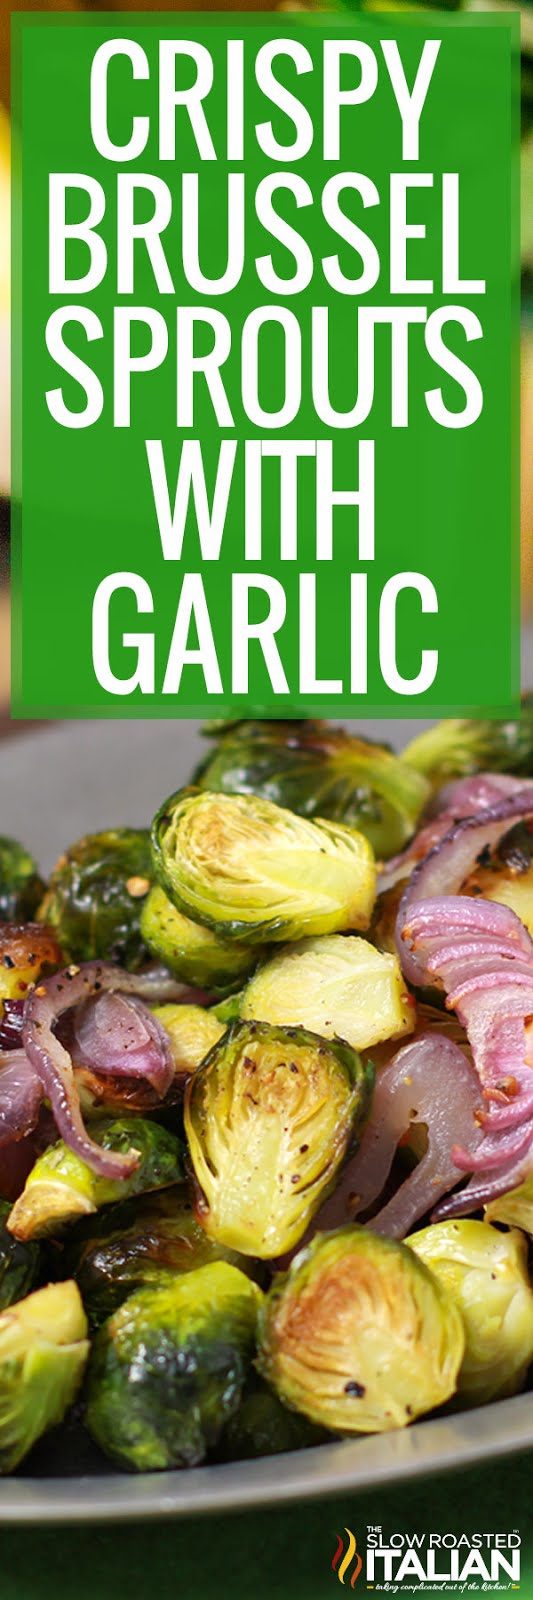 titled image for crispy brussel sprouts with garlic